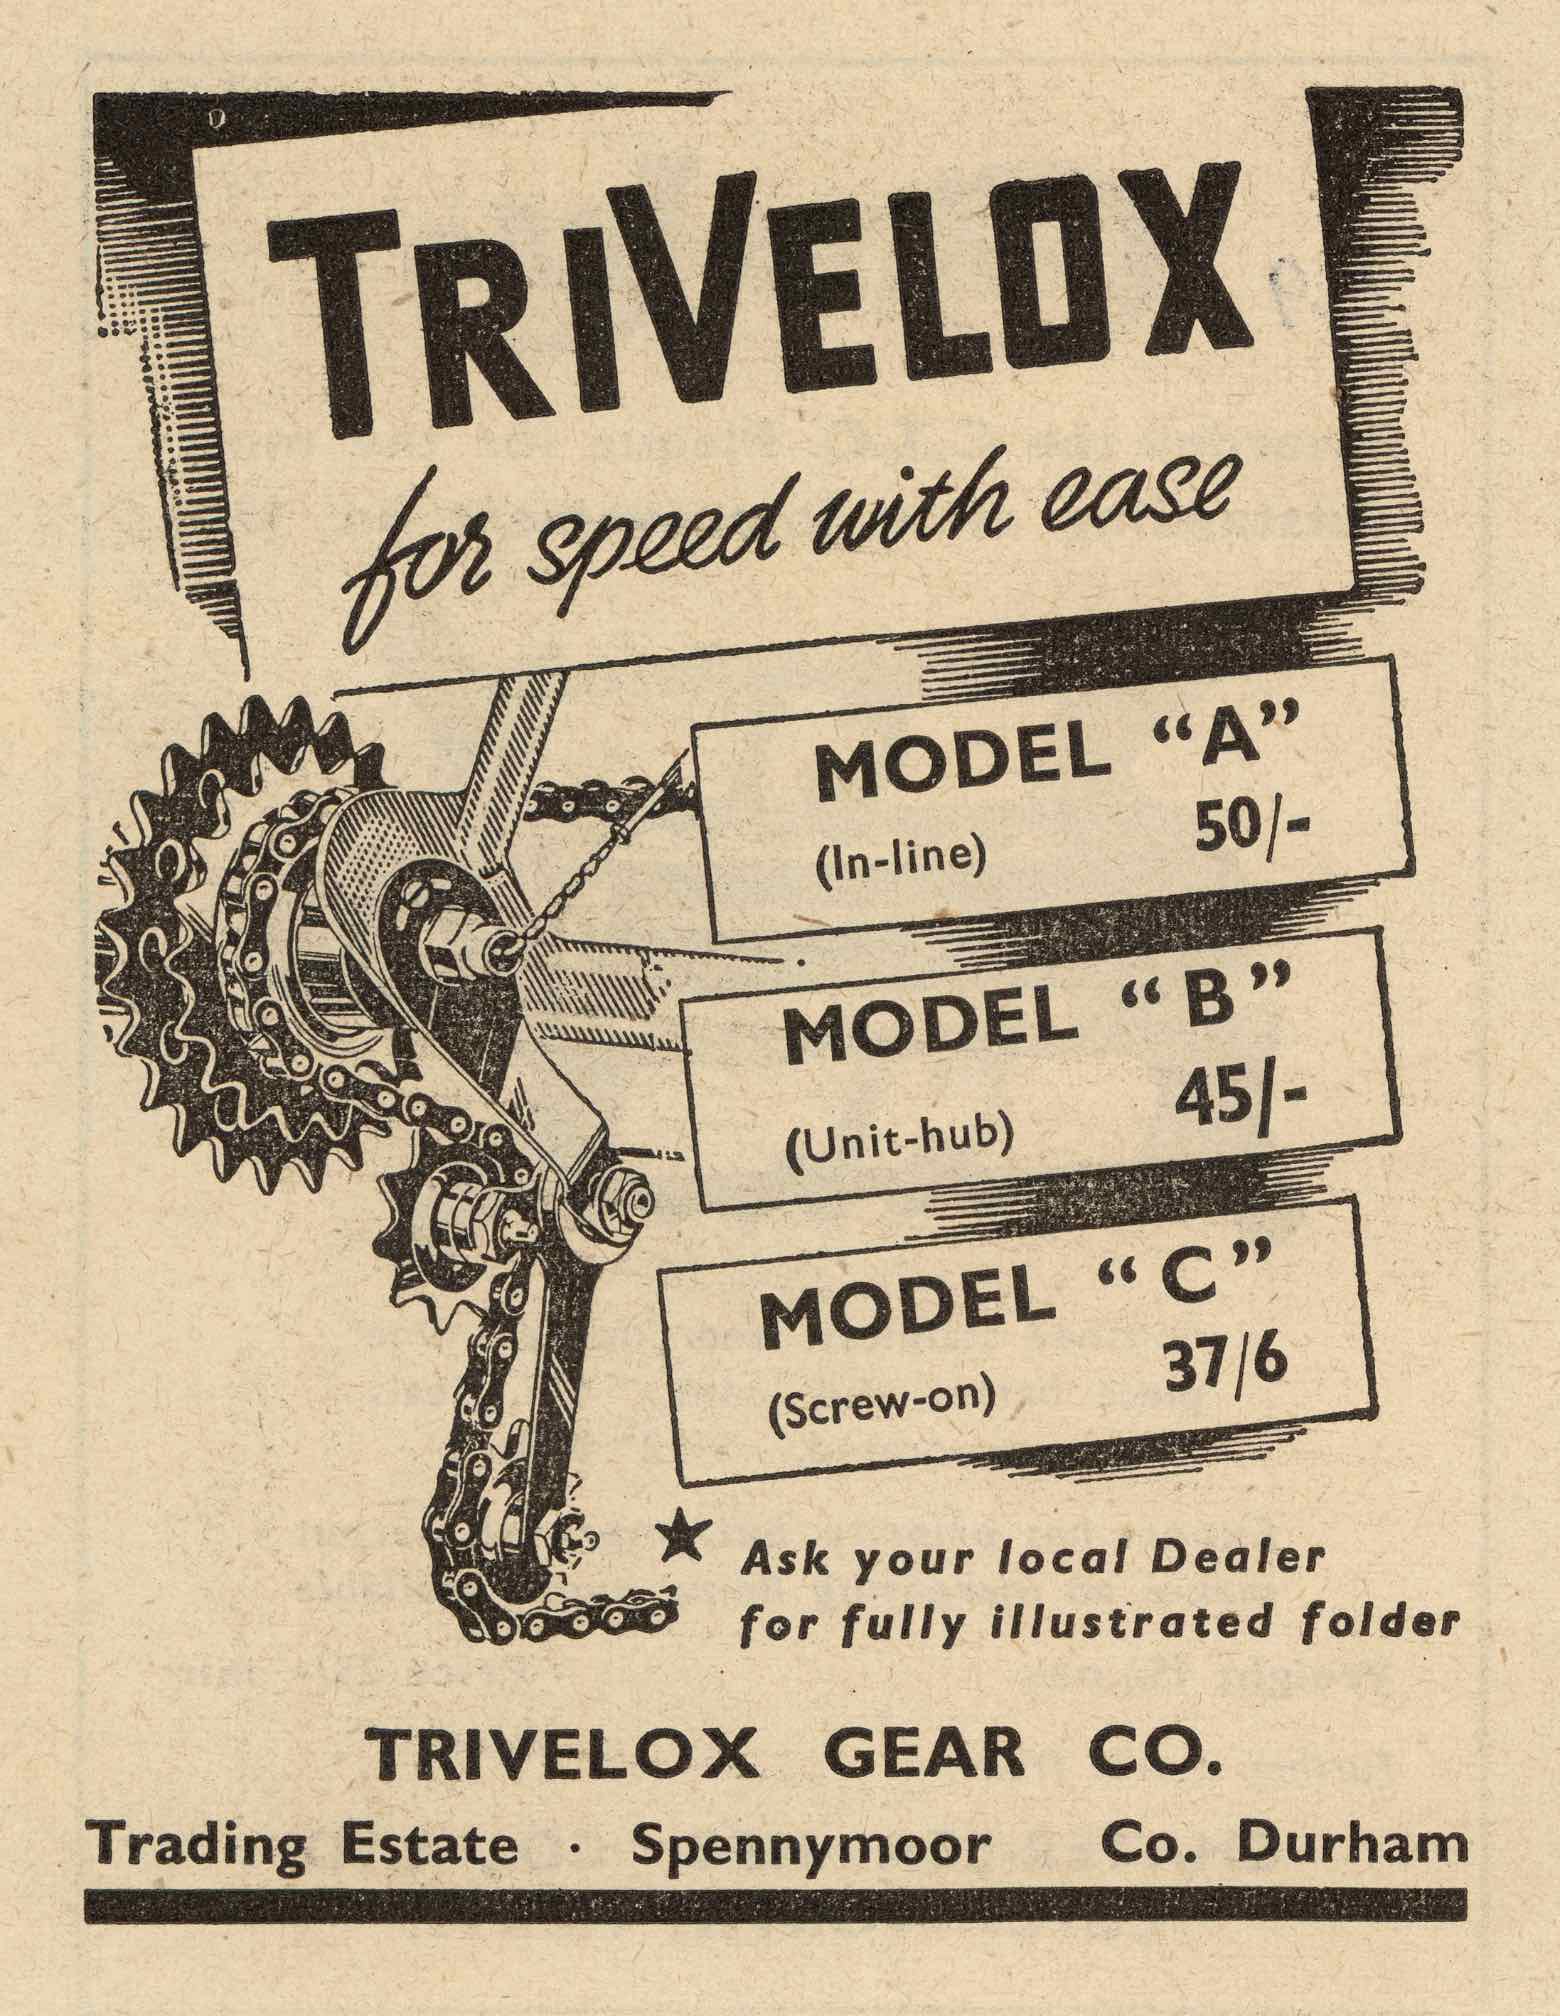 The Bicycle 1949 - TriVelox advert main image